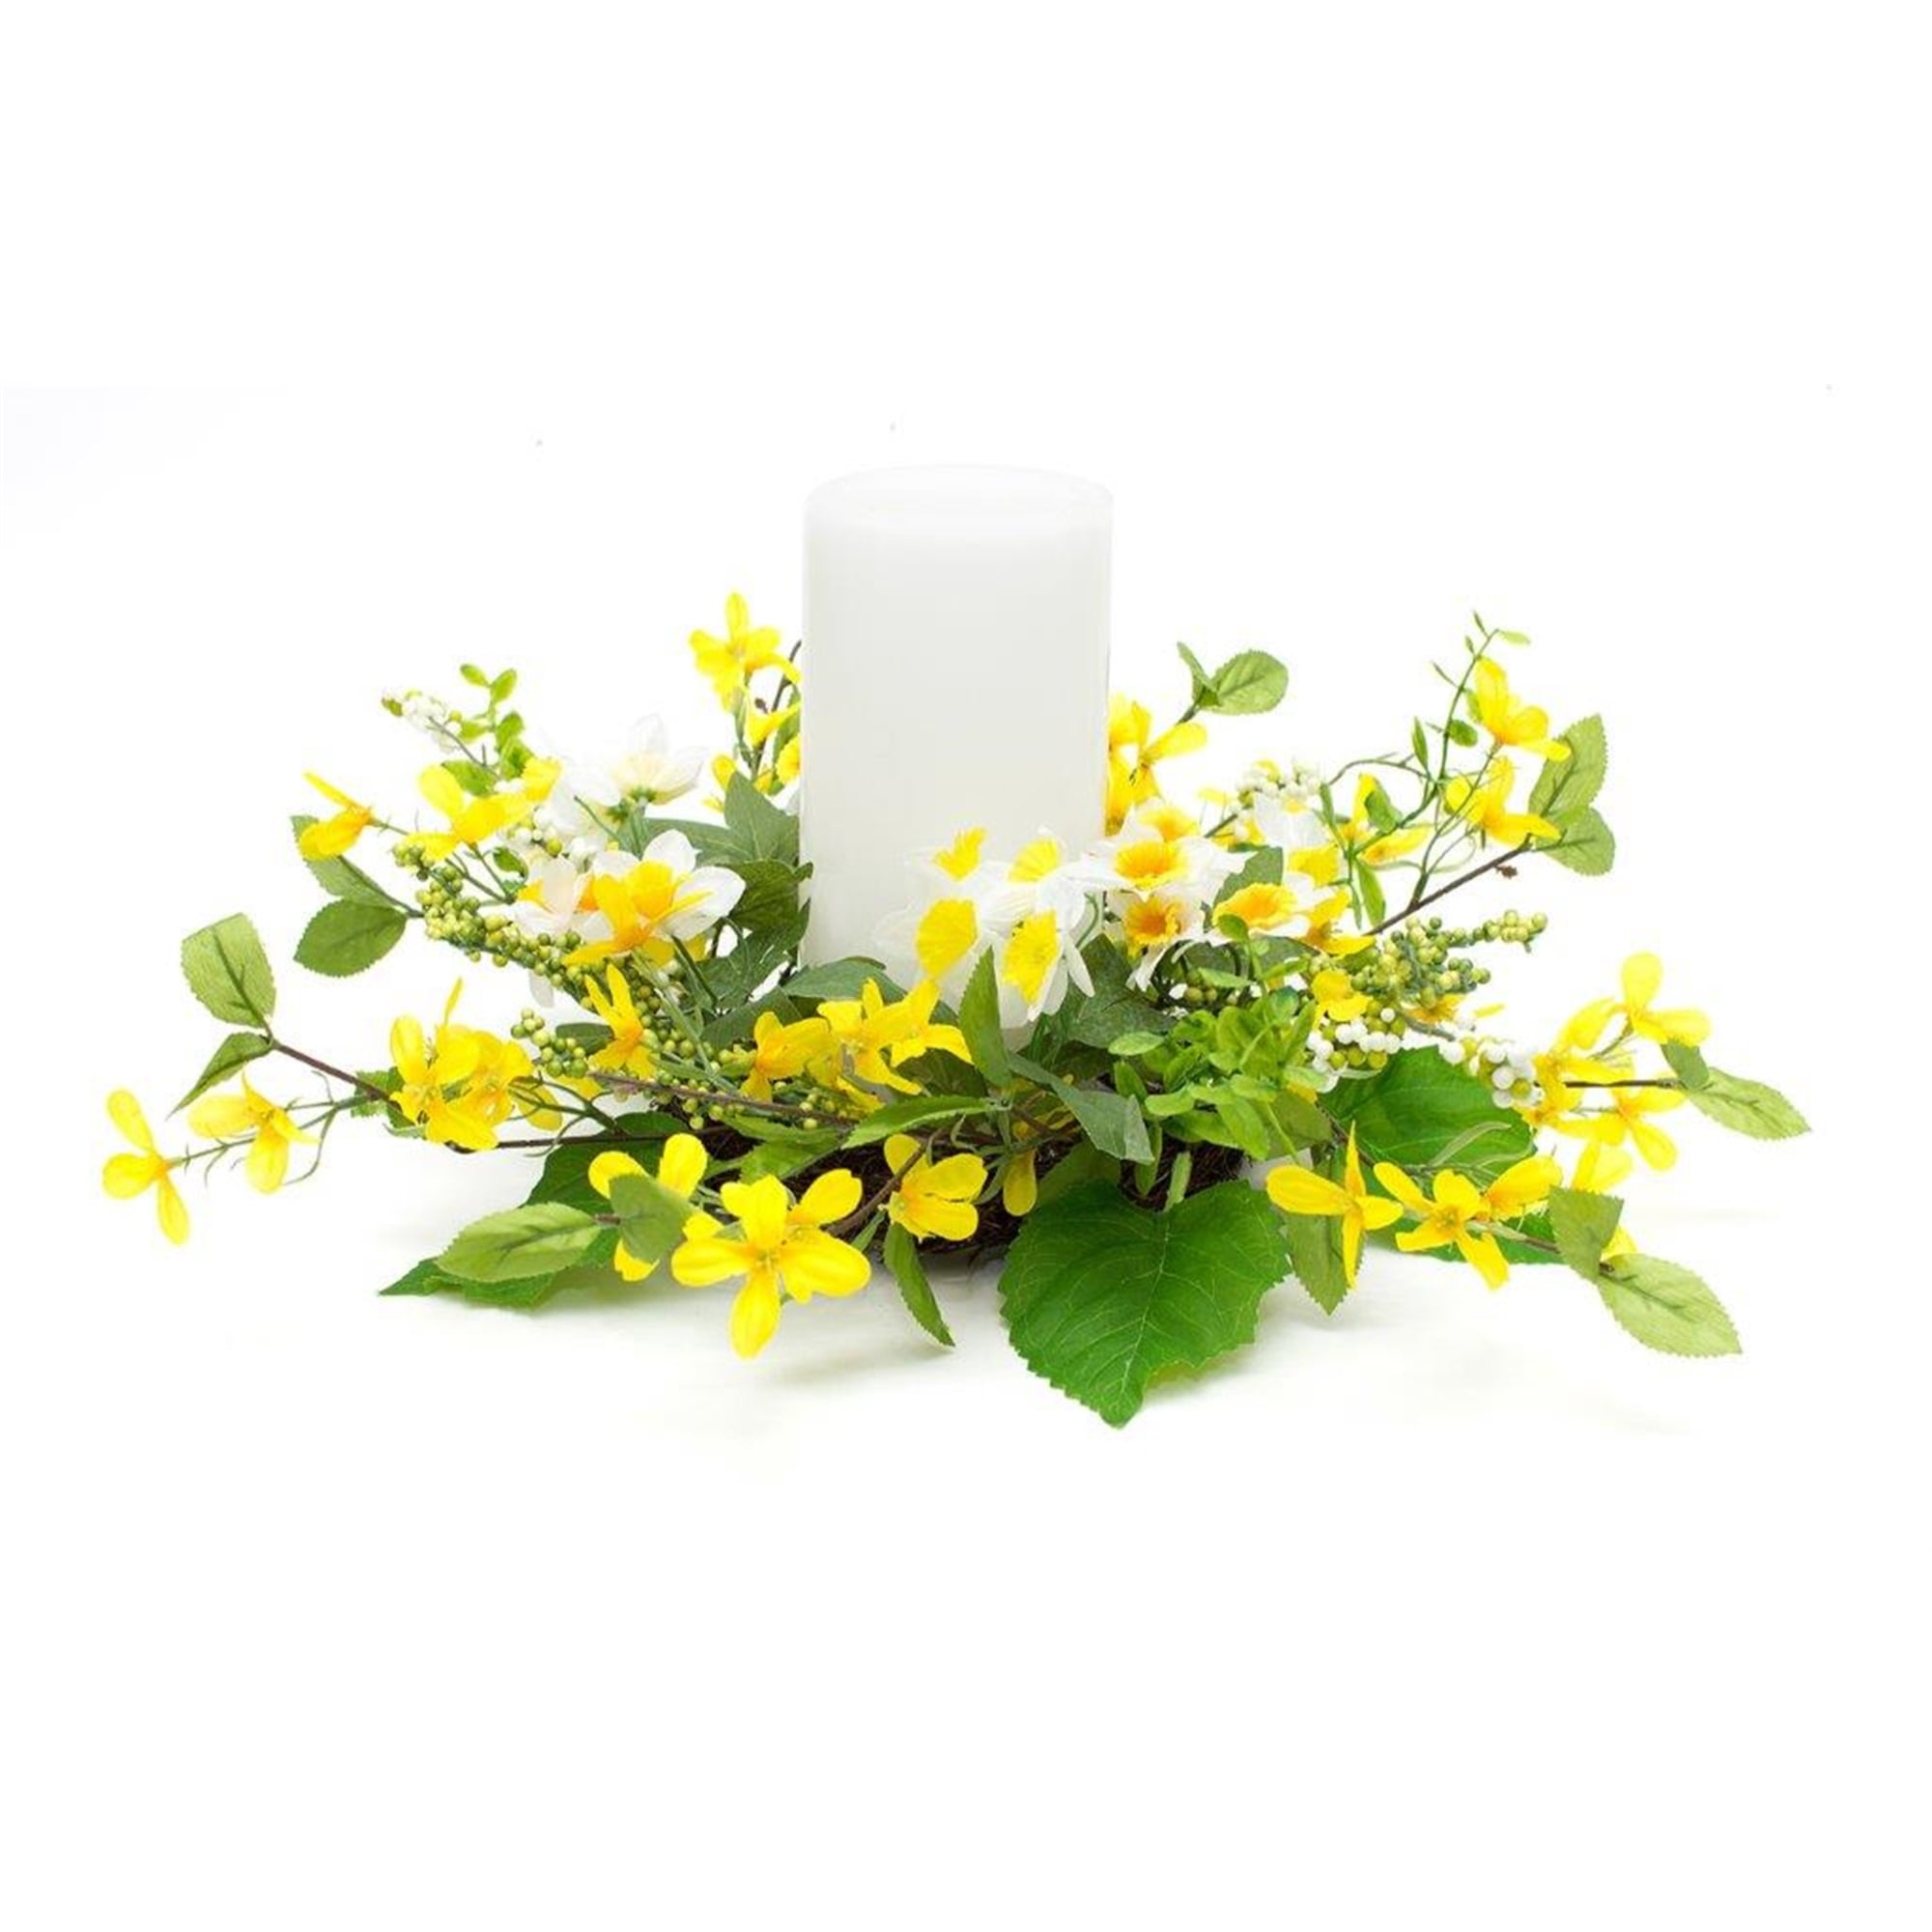 Narcissus and Forsythia Candle Ring 22"D Polyester (Fits a 6" Candle)